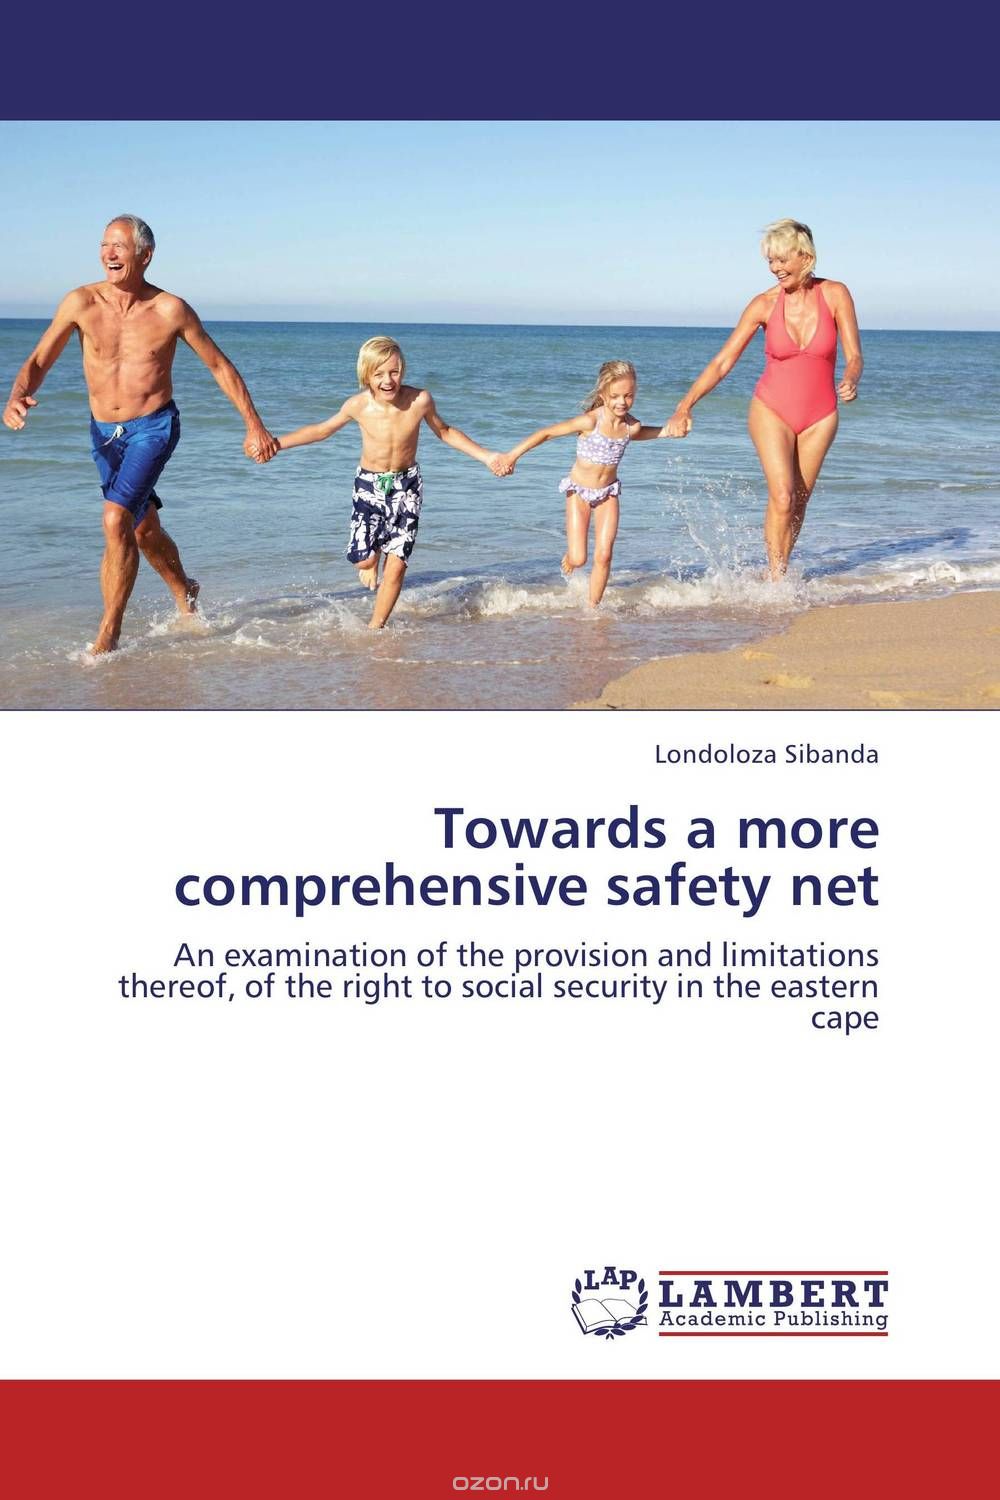 Towards a more comprehensive safety net